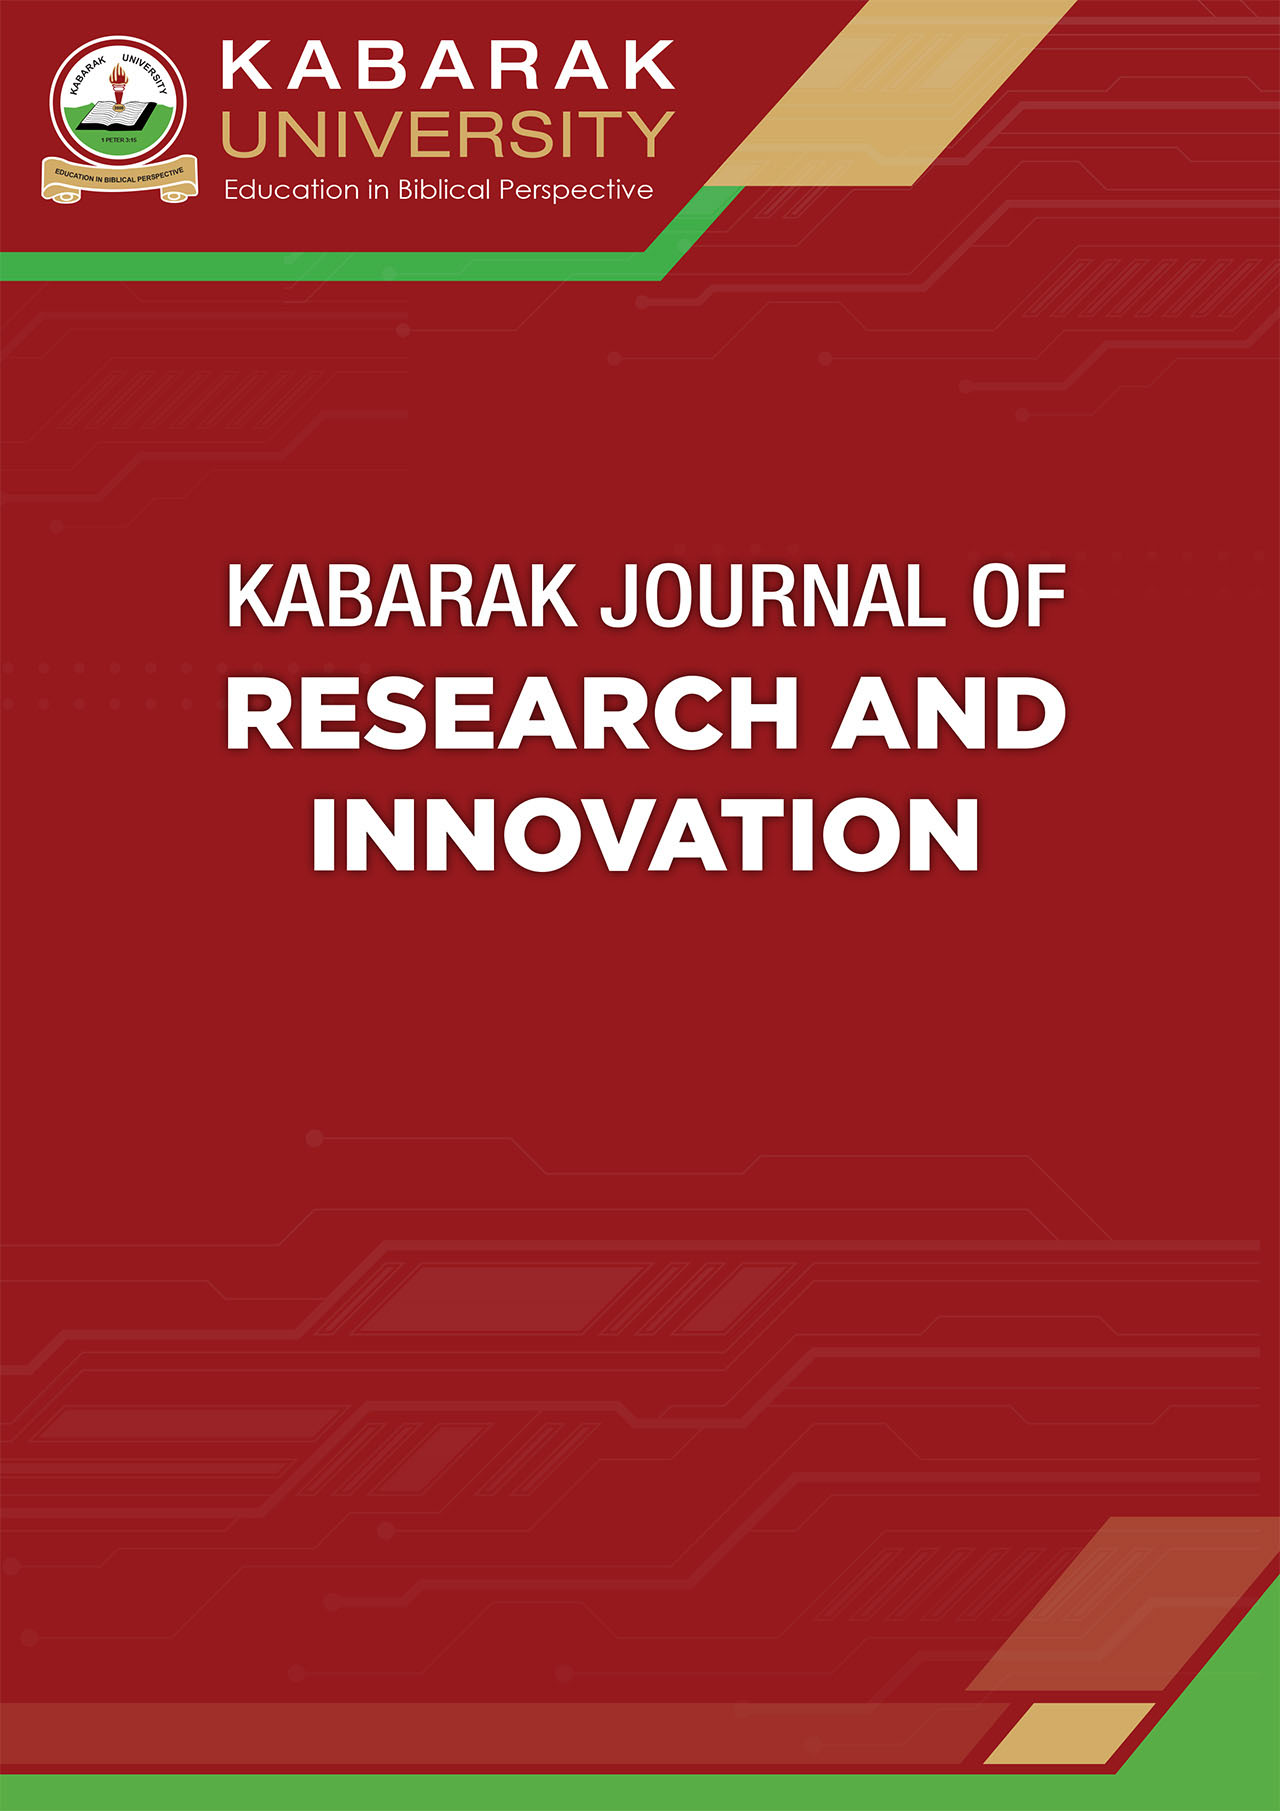 					View Vol. 1 No. 1 (2012): Kabarak Journal of Research and Innovation (KJRI)
				